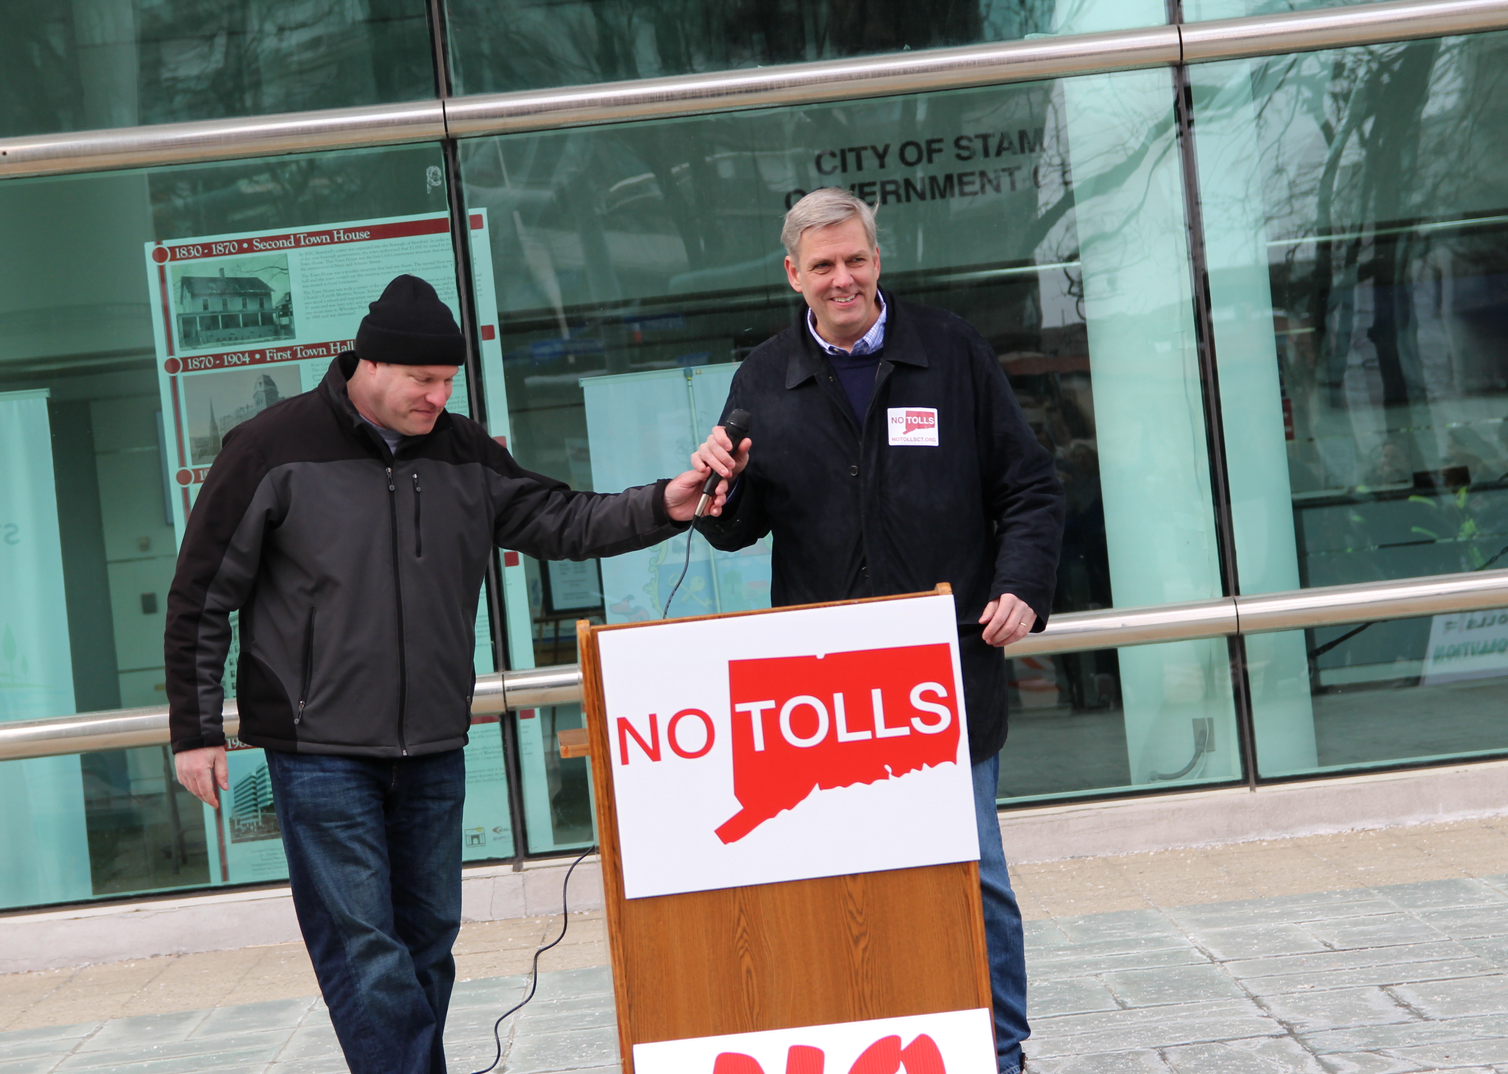 Bob Stefanowski spoke out against tolls at the rally at Stamford Government Center on Feb 23, 2019 Photo: Leslie Yager